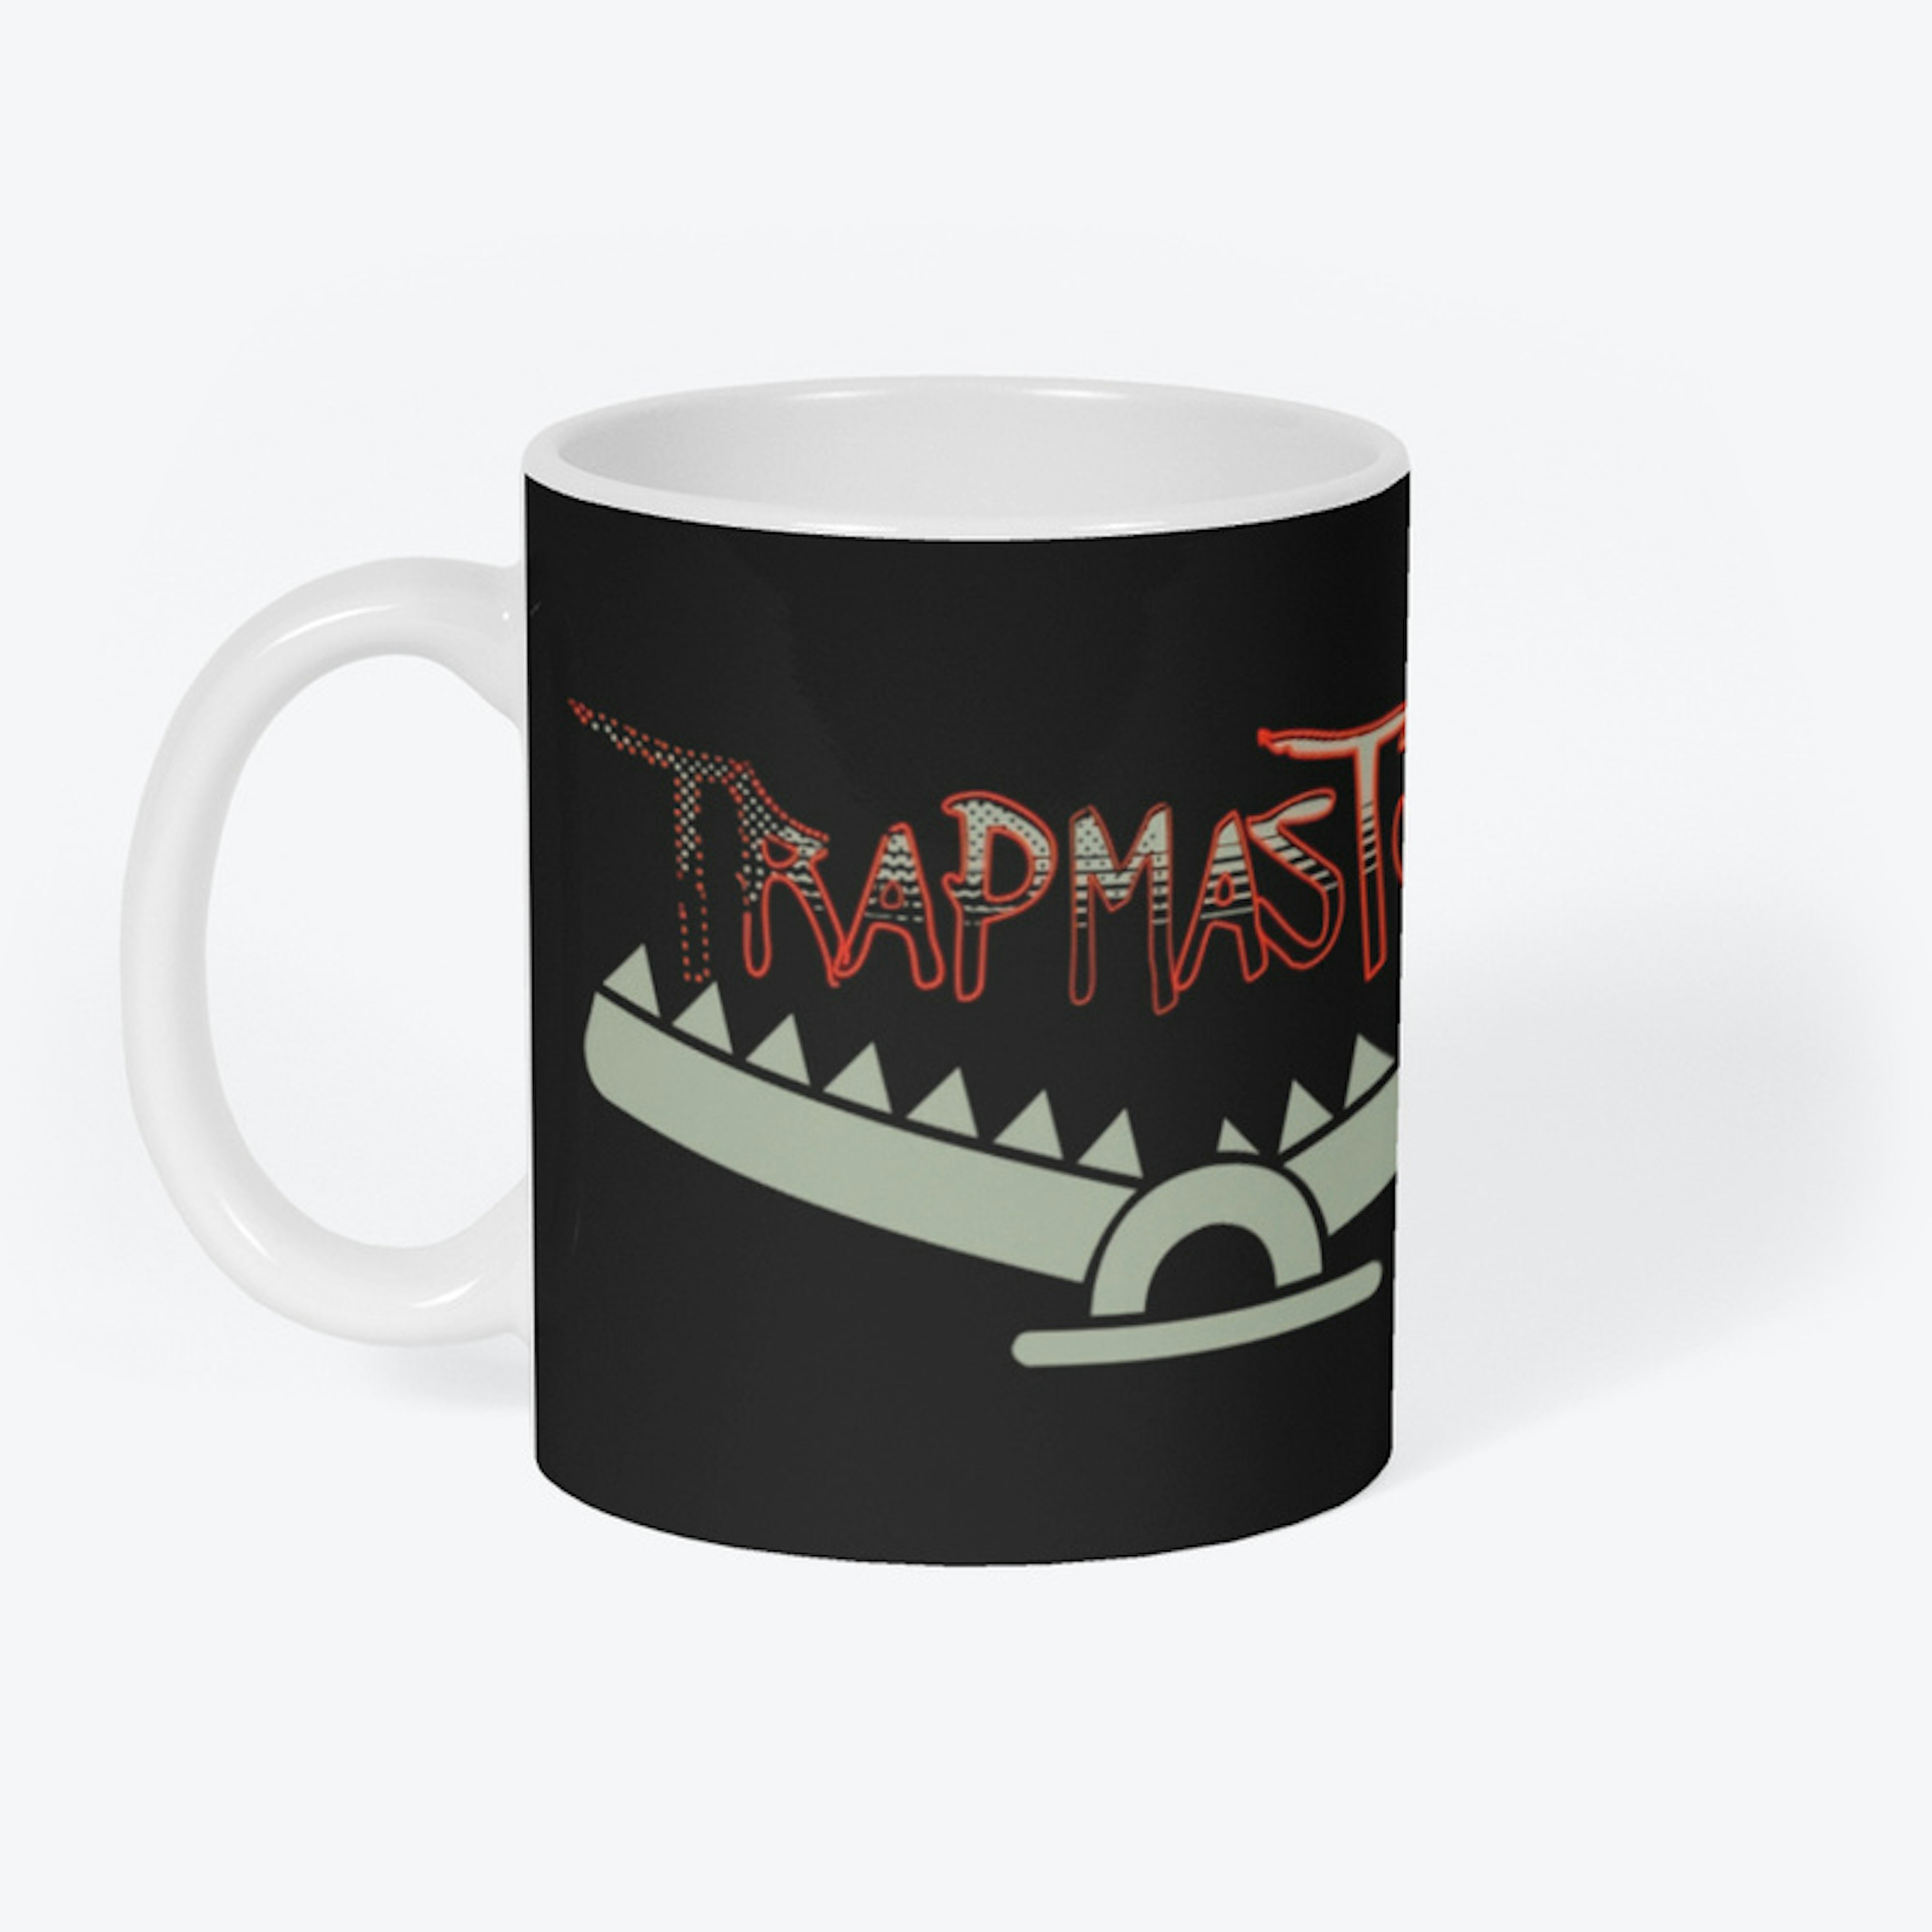 REALTRAPMAST3RS OFFICIAL NEW MERCH